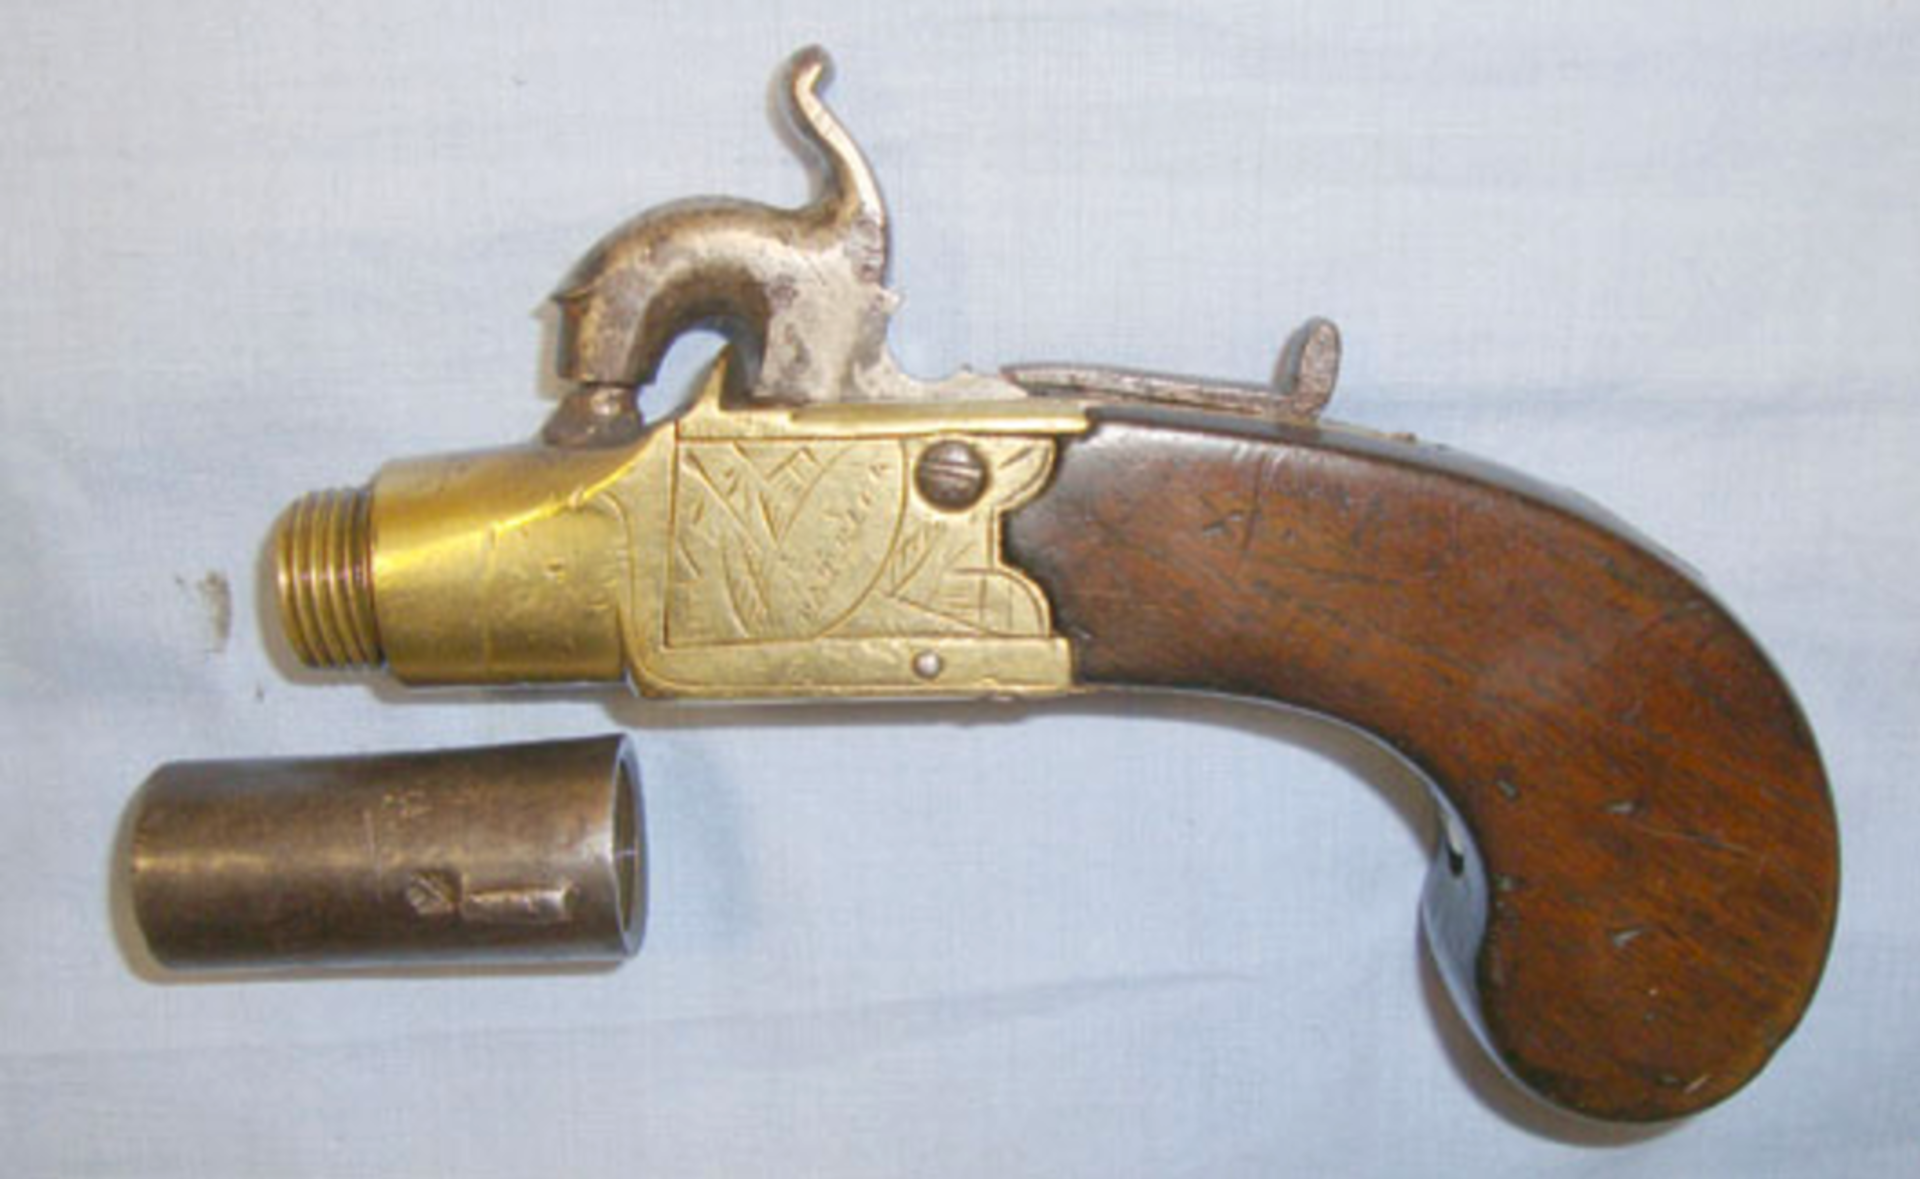 1795-1832 English, .44" Bore, Brass Framed Percussion Pocket Pistol With Screw Off Barrel By Patrick - Image 3 of 3